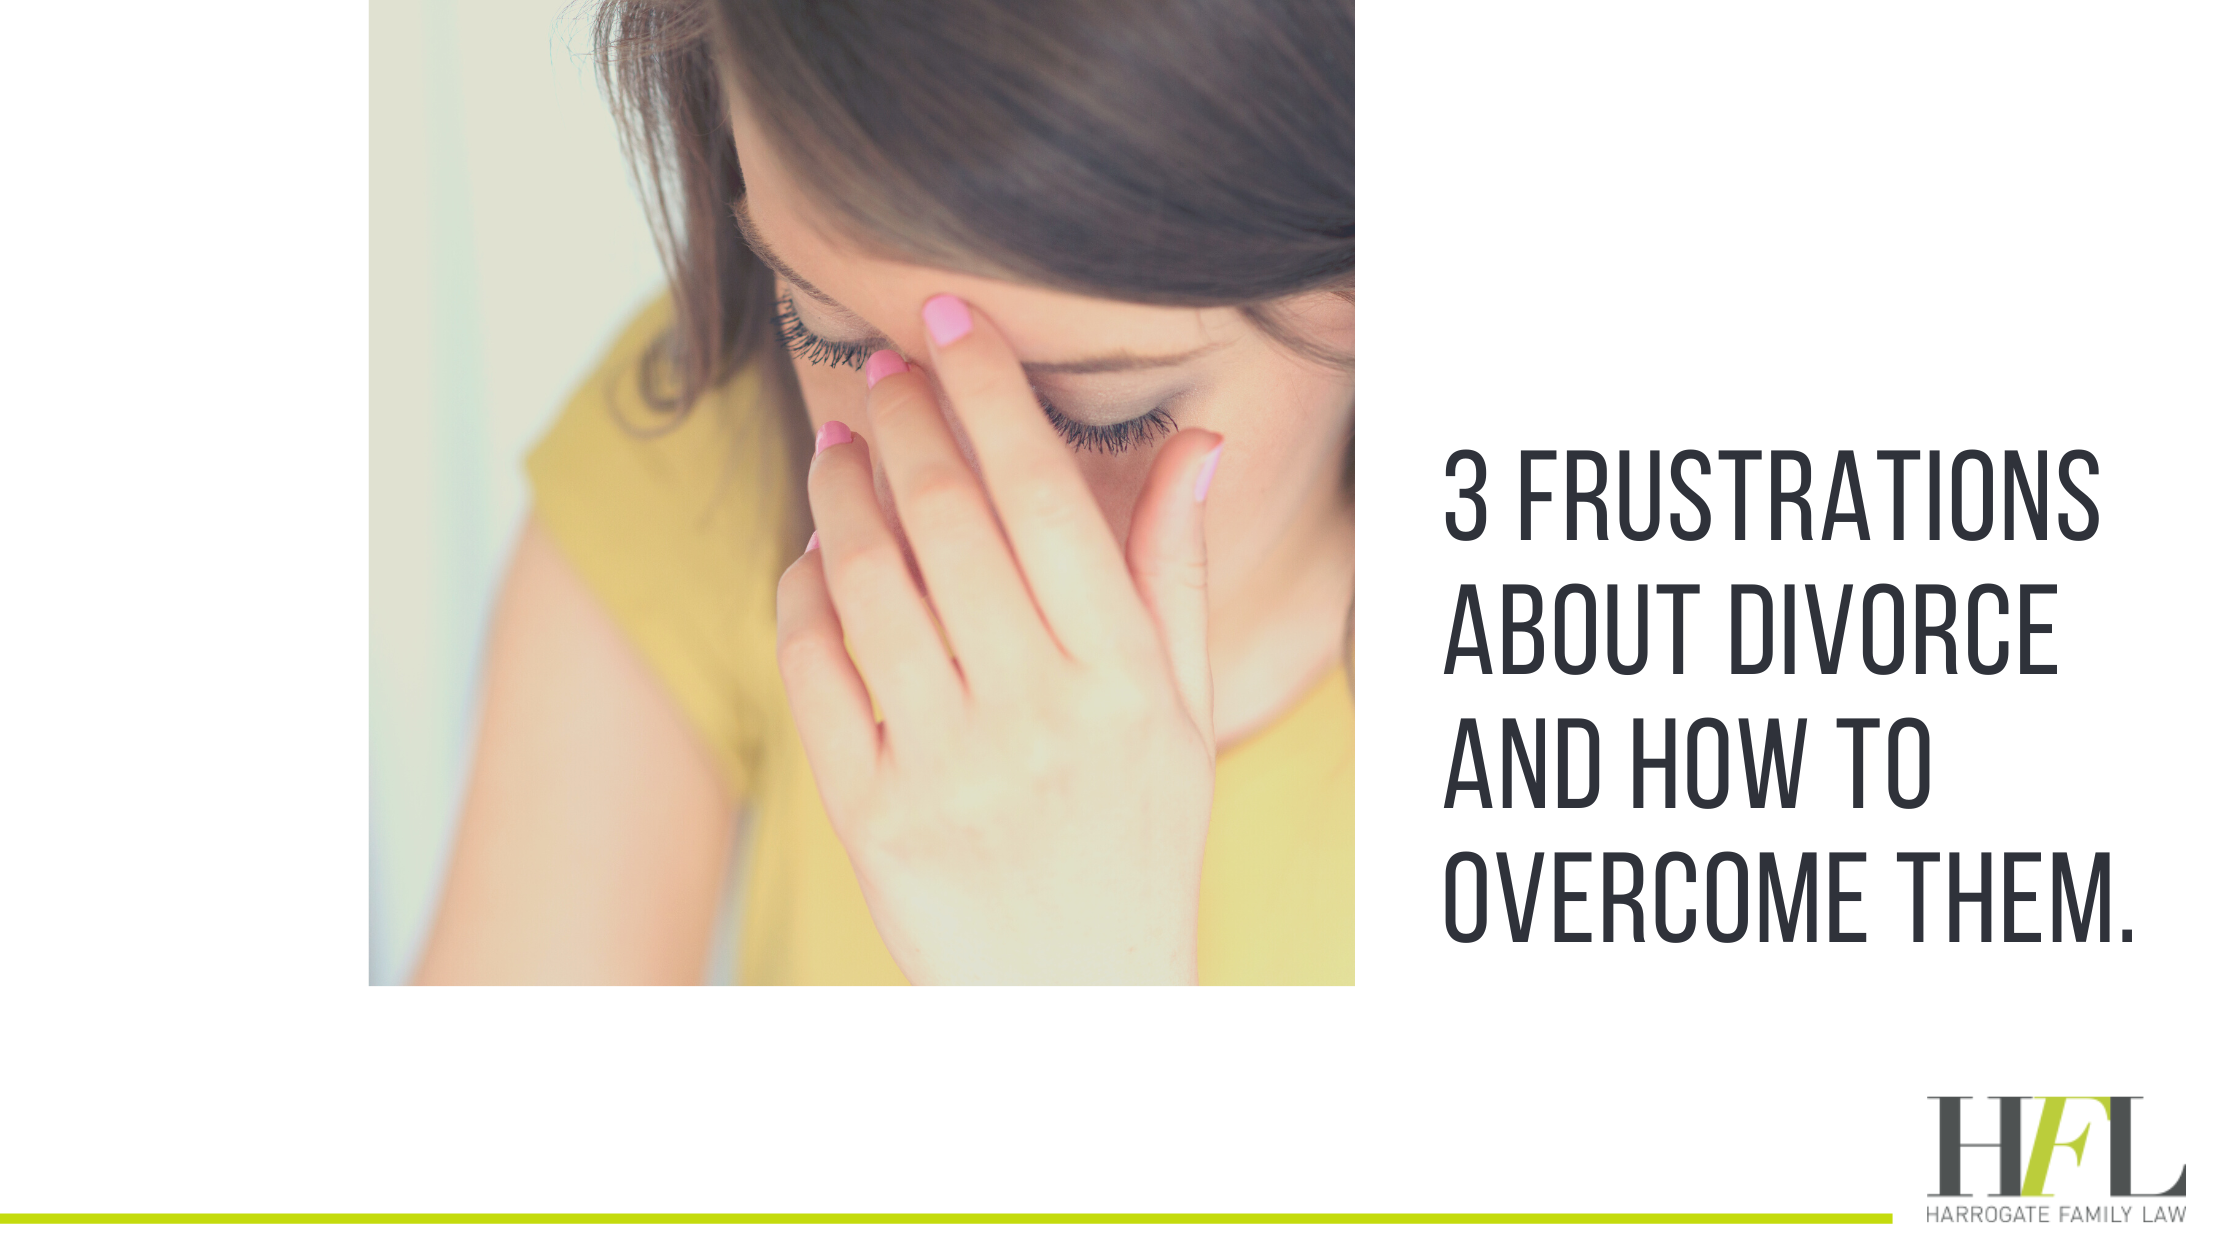 3 frustrations about divorce and how to overcome them